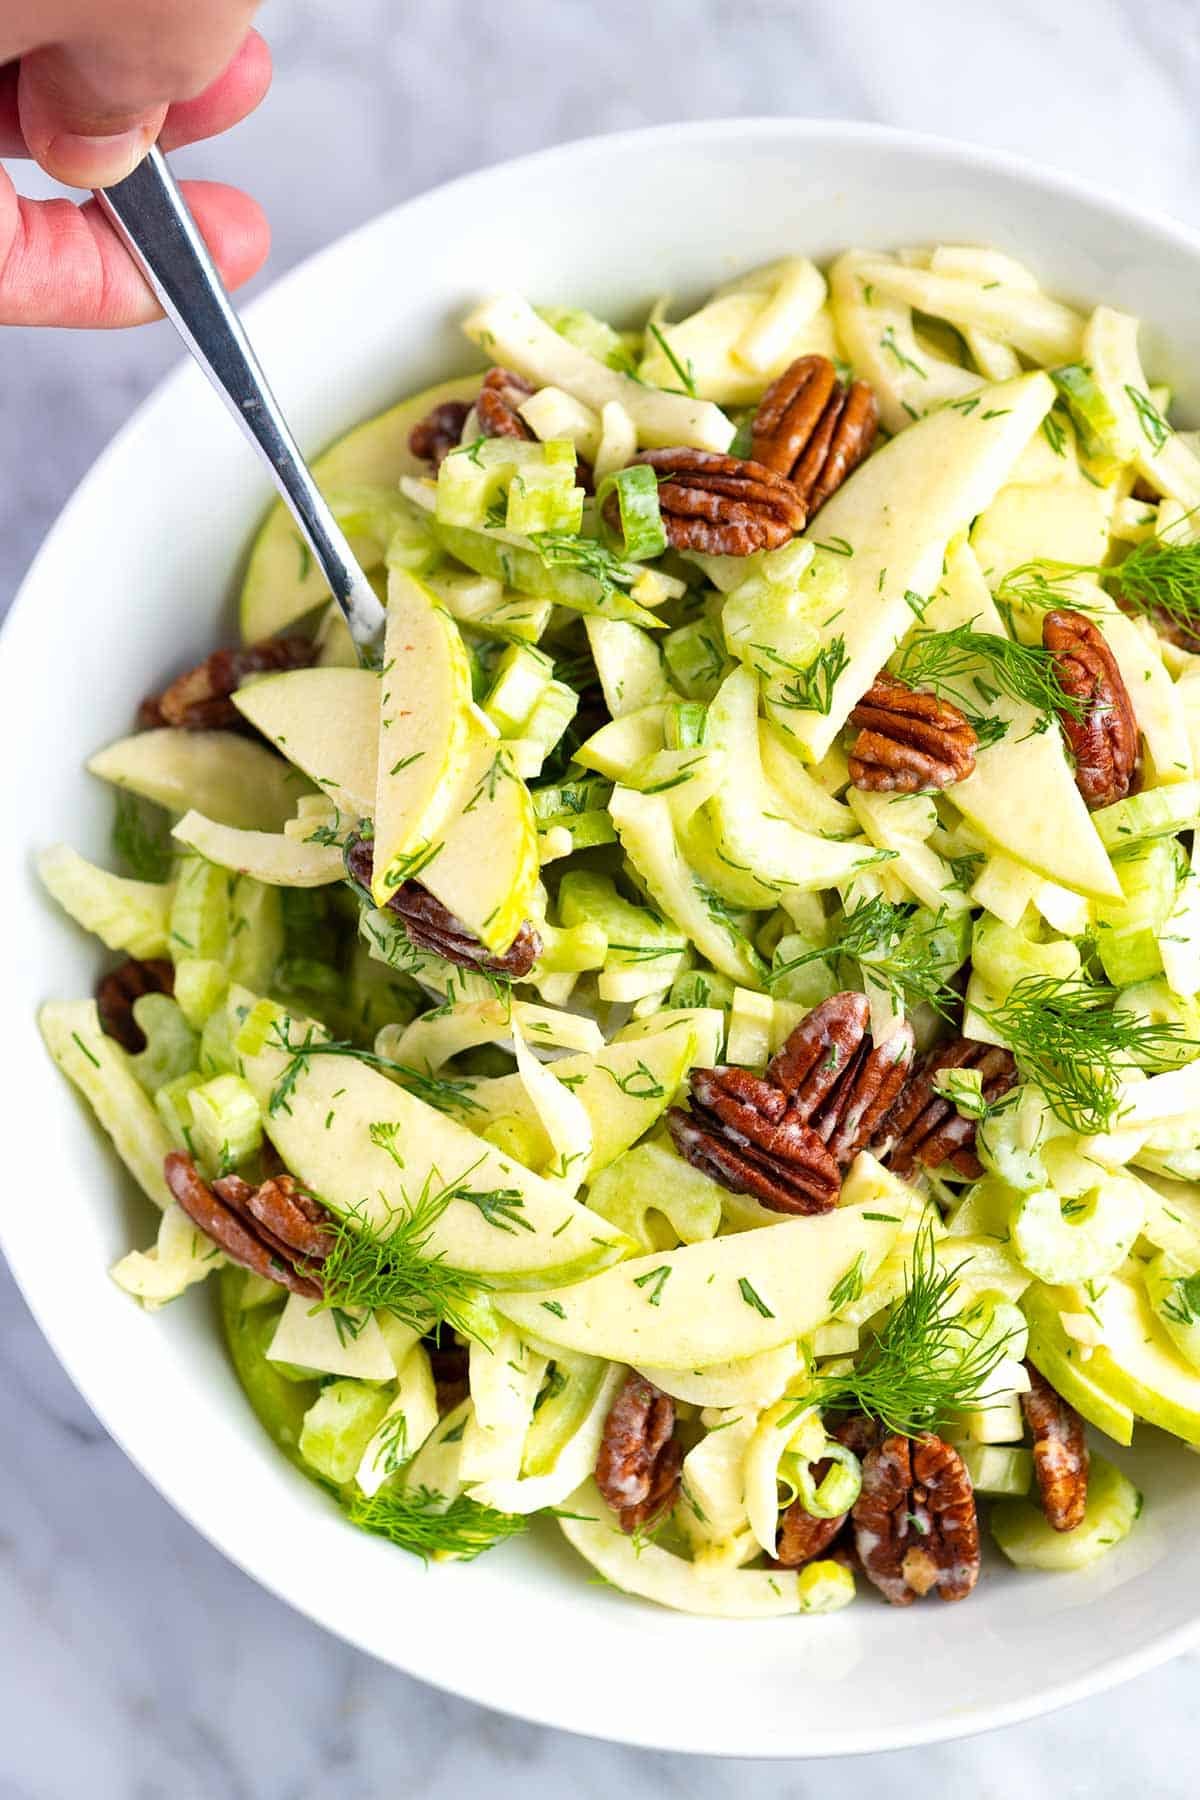 Apple Salad with Celery and Fennel